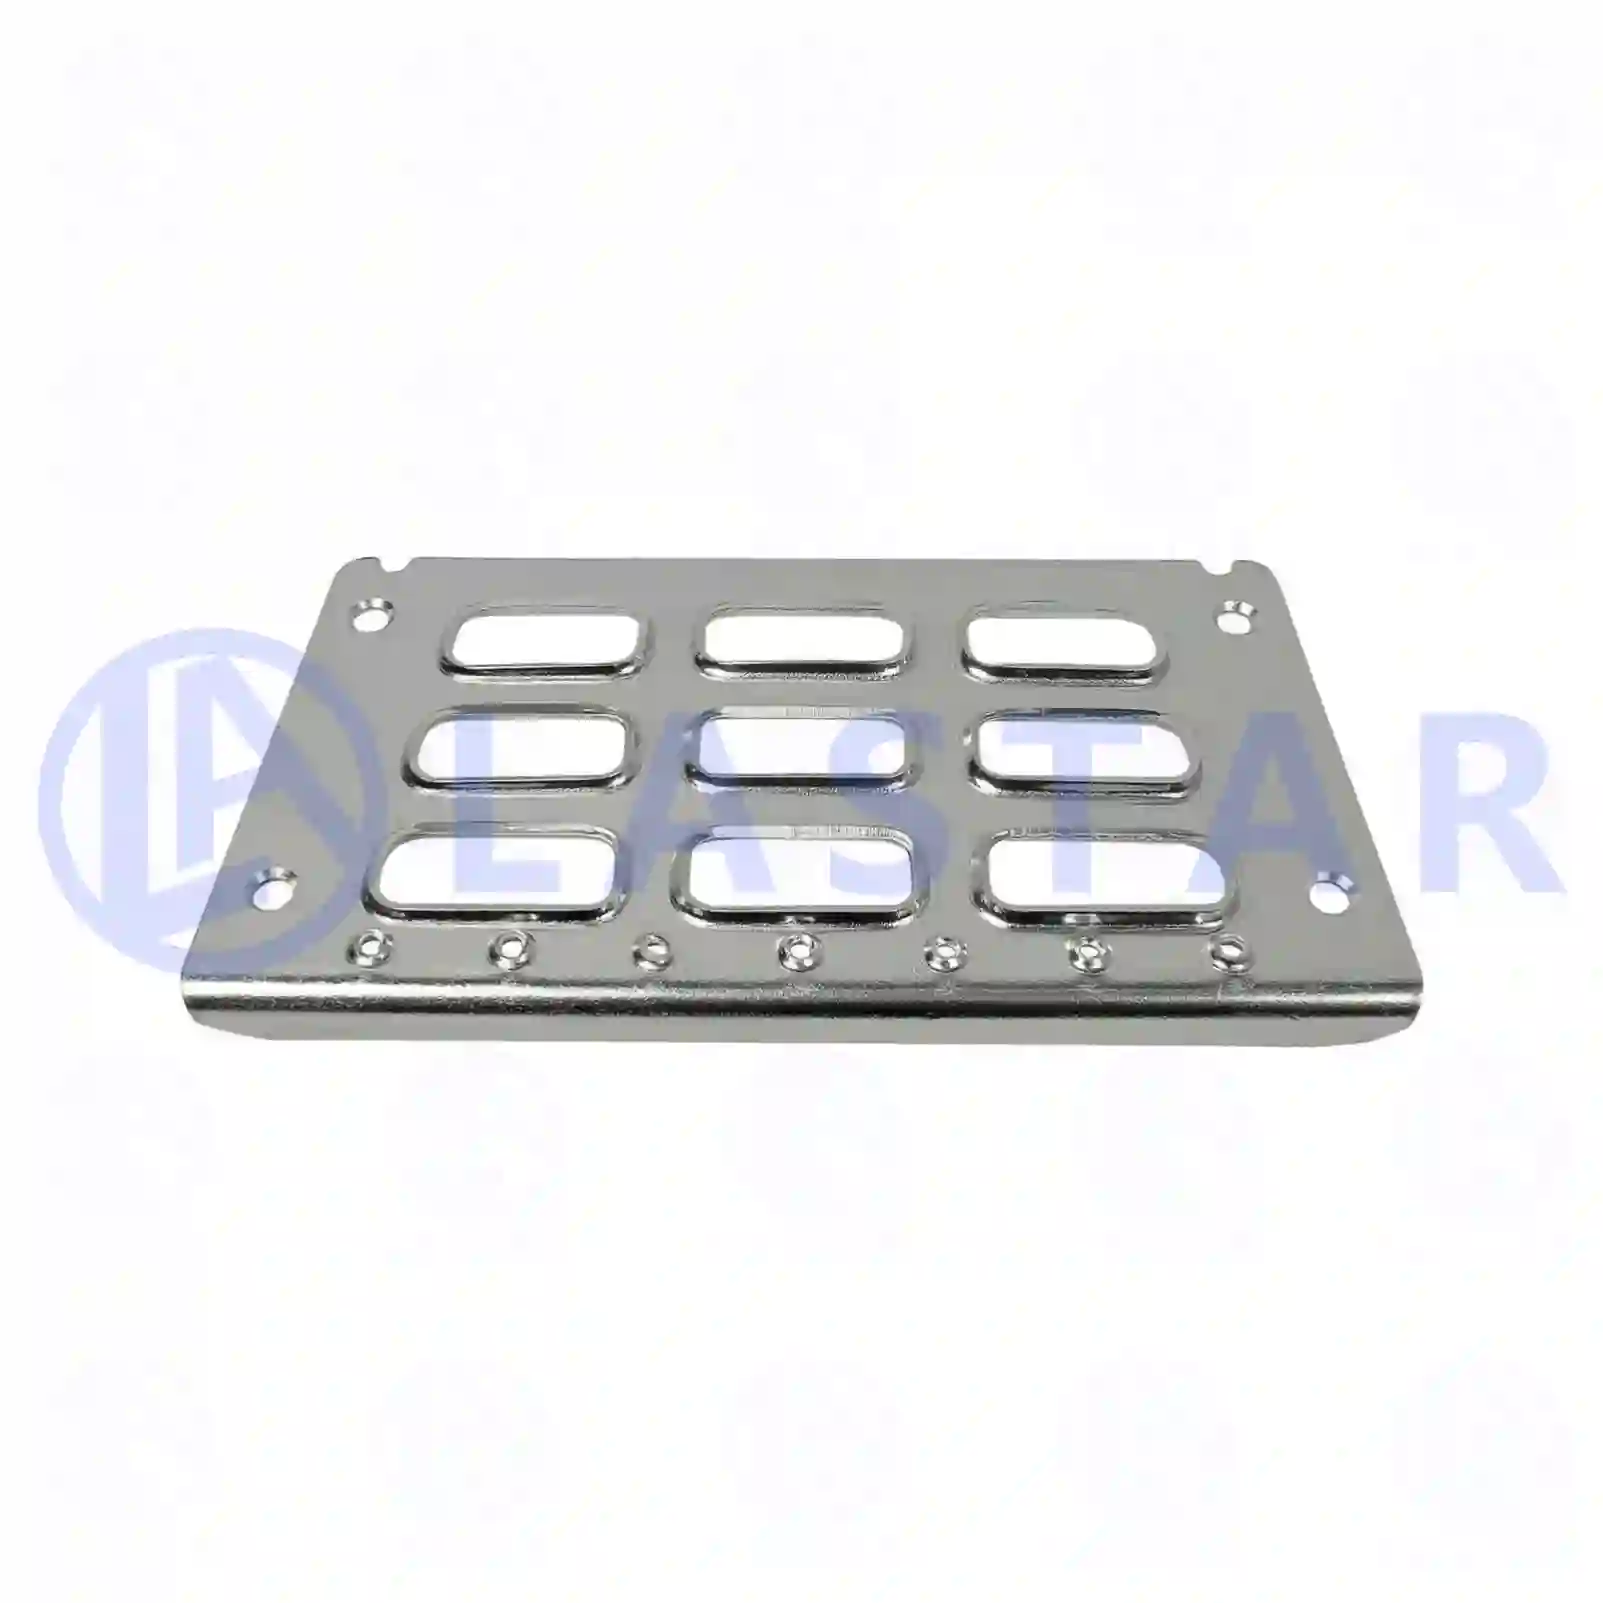 Step, 77721023, 20379438, 8191104, 8191314, ZG61123-0008 ||  77721023 Lastar Spare Part | Truck Spare Parts, Auotomotive Spare Parts Step, 77721023, 20379438, 8191104, 8191314, ZG61123-0008 ||  77721023 Lastar Spare Part | Truck Spare Parts, Auotomotive Spare Parts